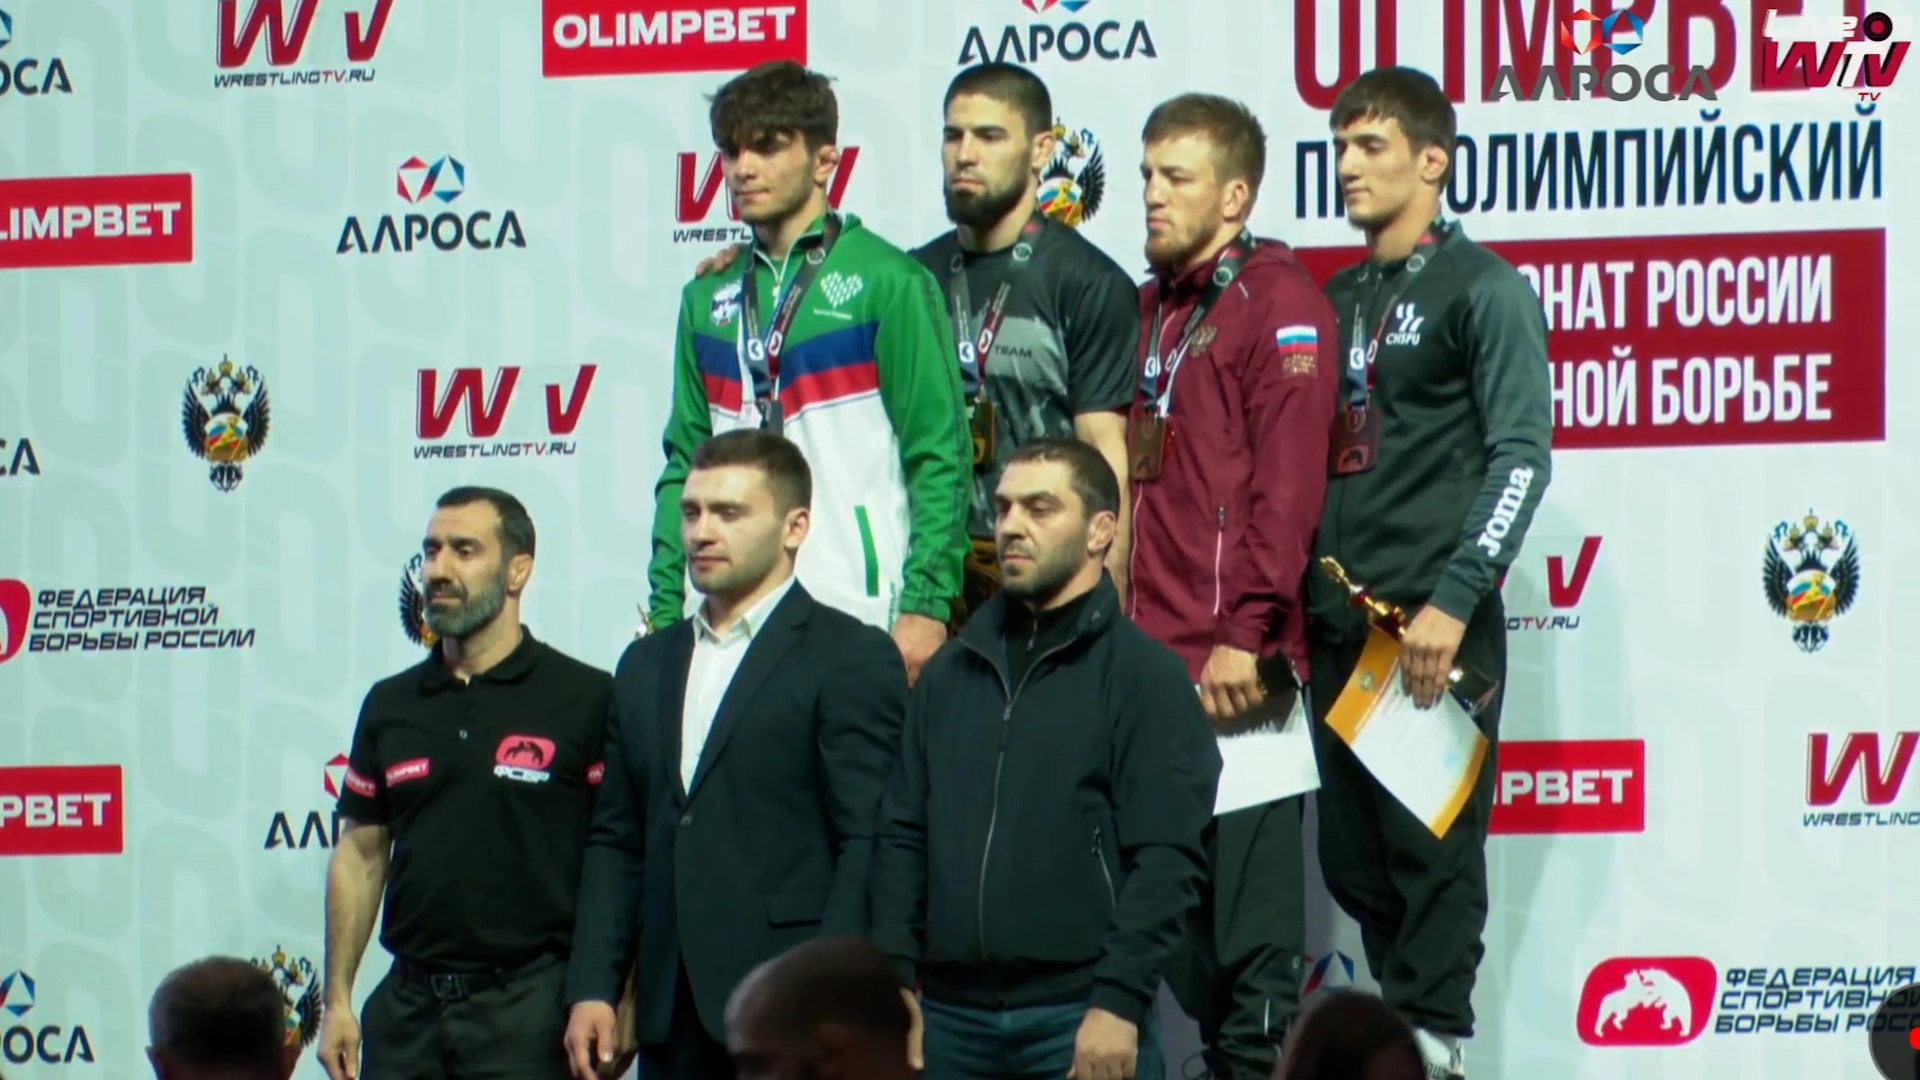 Inalbek Sheriev - Champion of Russia in freestyle wrestling. Results of the third day